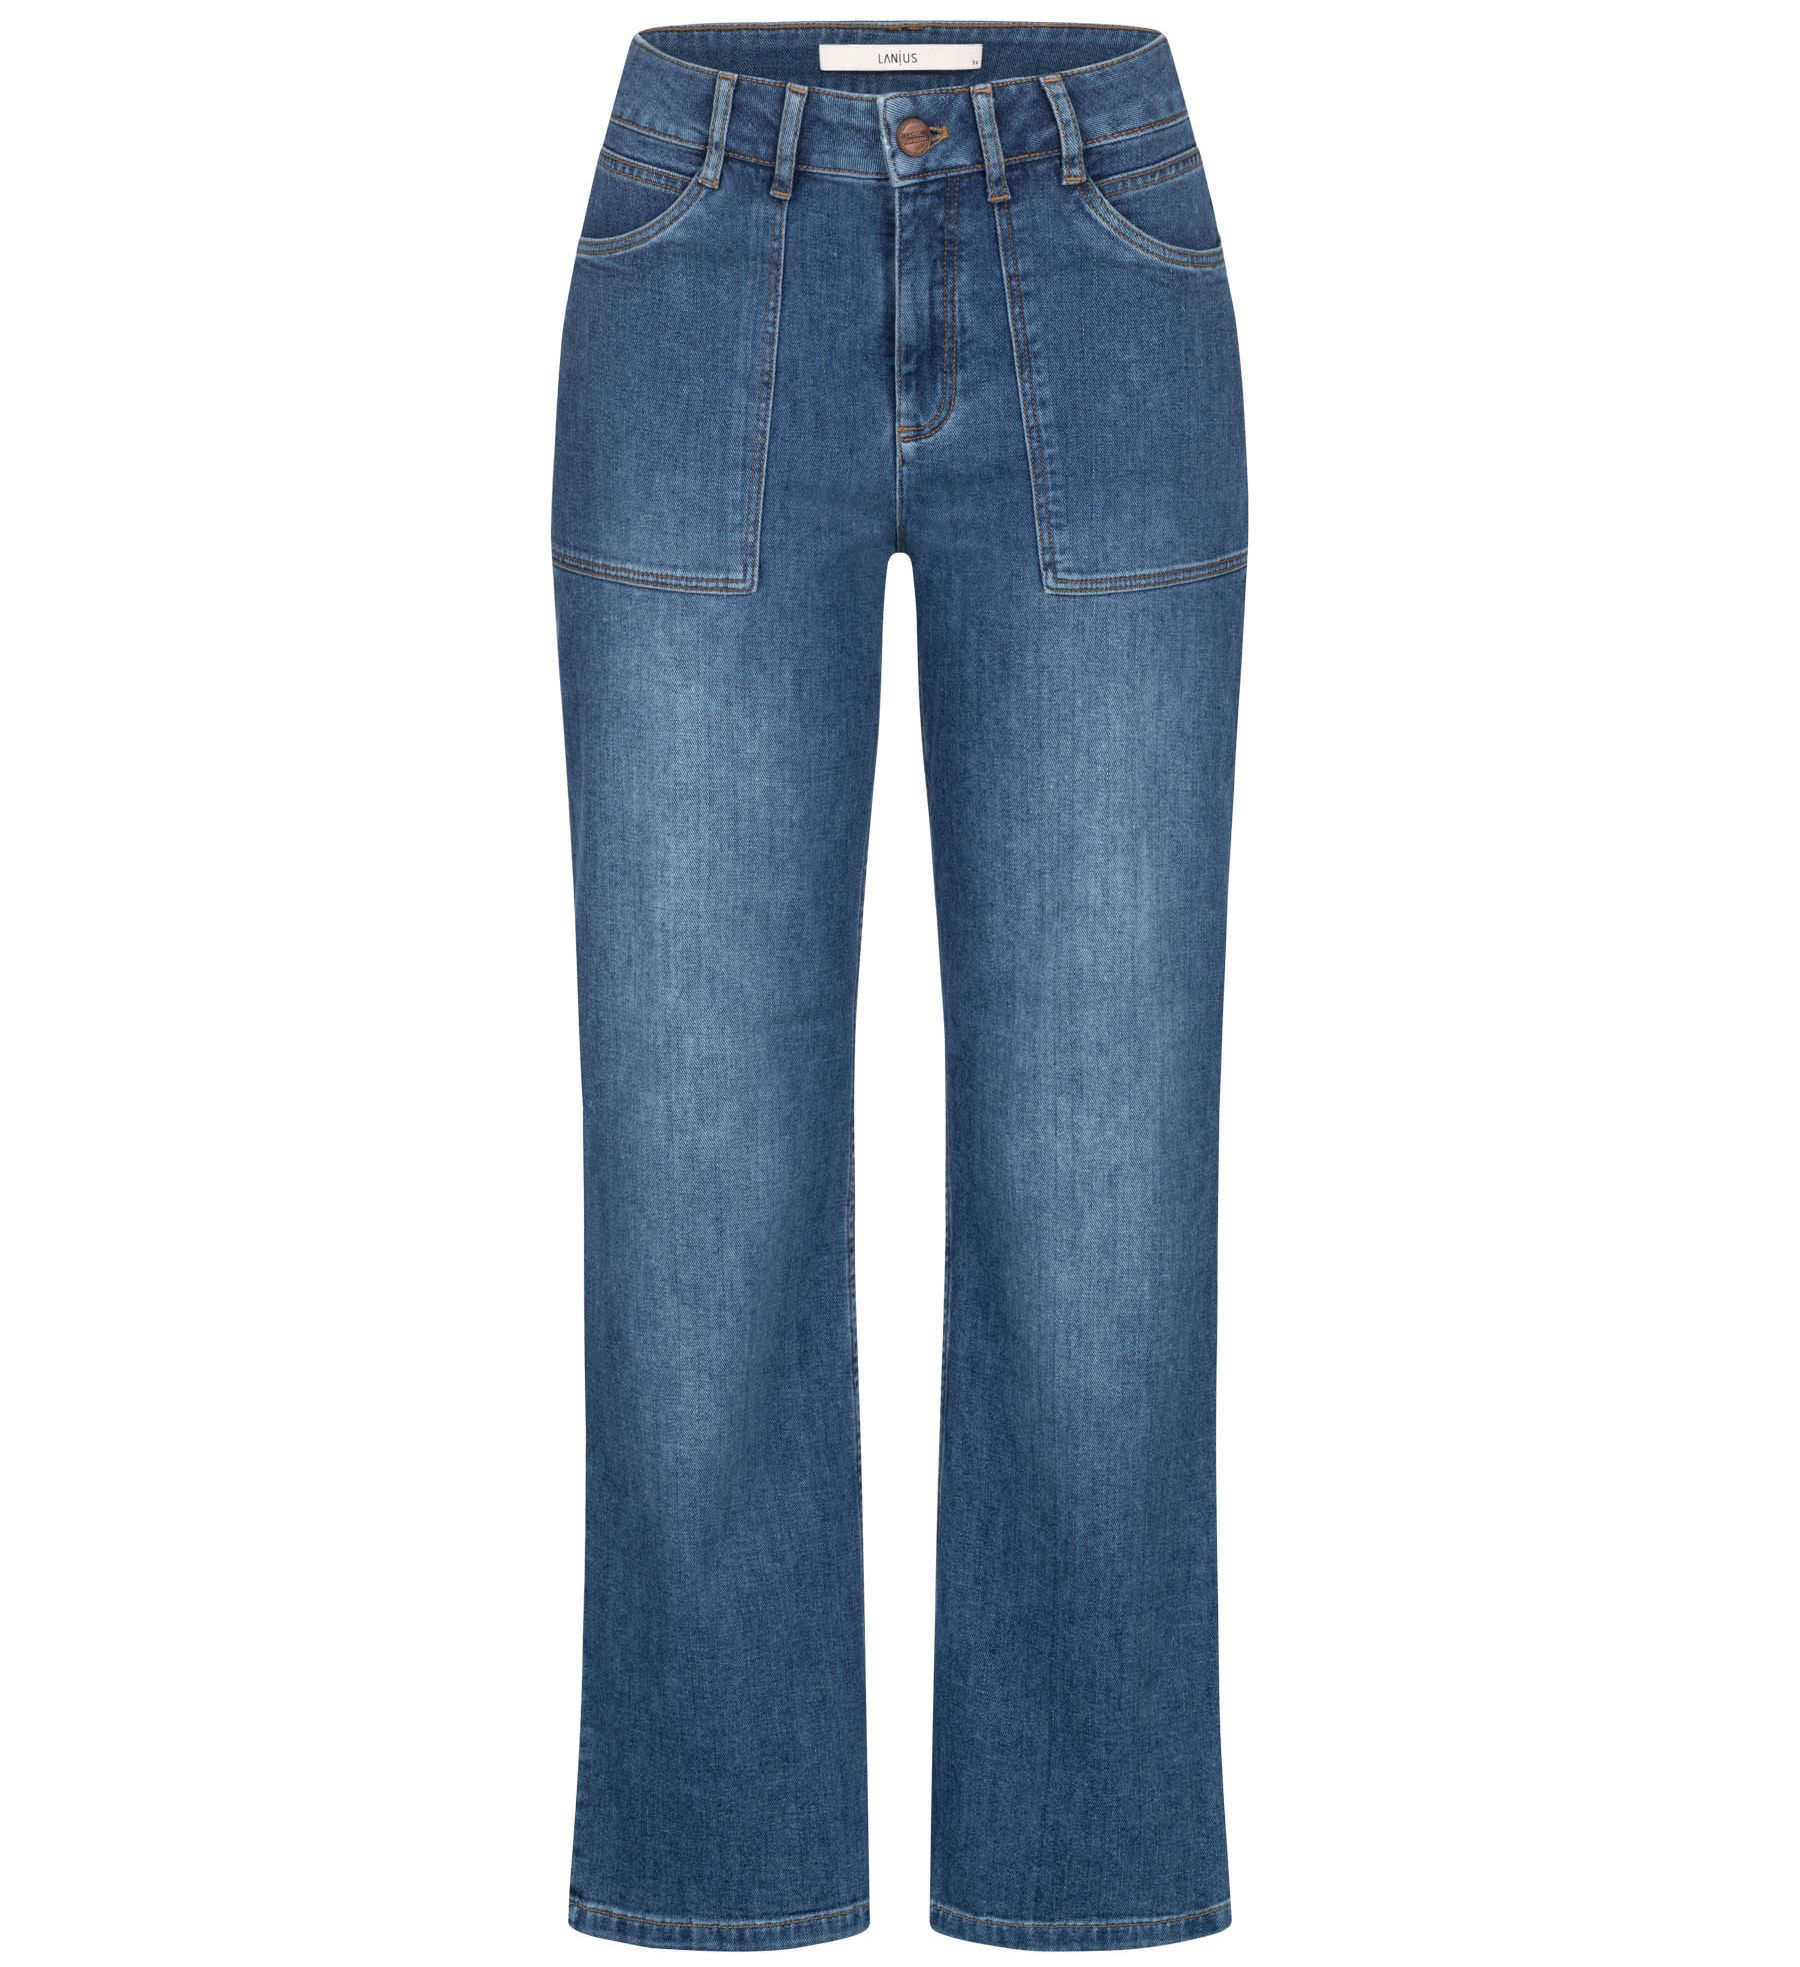 Cropped Relaxed Jeans blue denim